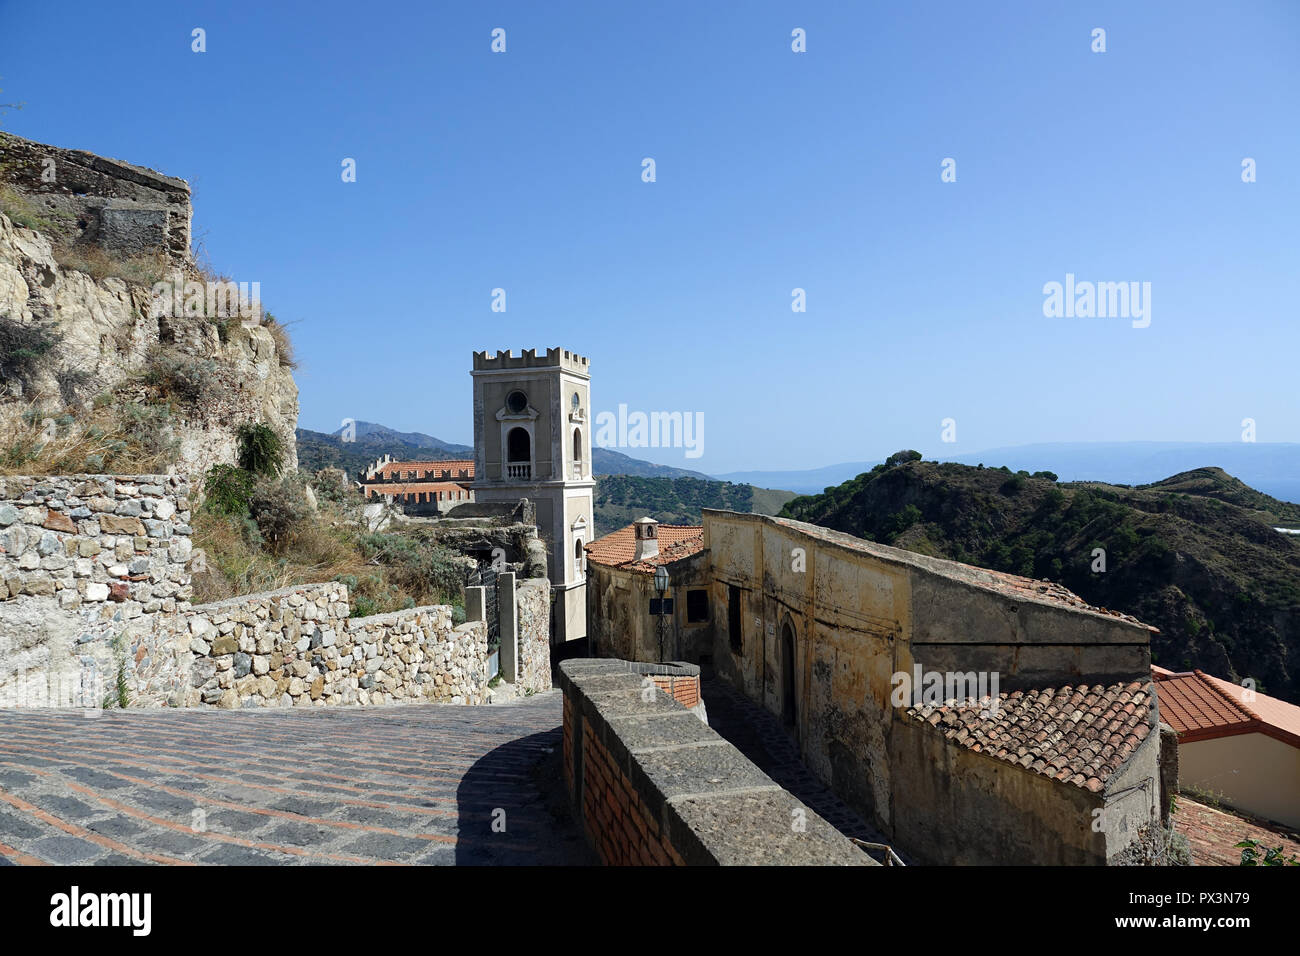 Savoca, Italy. 05th Sep, 2018. 05 September 2018, Italy, Savoca: View to the Sicilian village Savoca and church St. Nicolo (back) from the 16th century. The church is also called Santa Lucia. The village has been known since 1415. Savoca was the location for several scenes of the film trilogy The Godfather. Credit: Alexandra Schuler/dpa/Alamy Live News Stock Photo